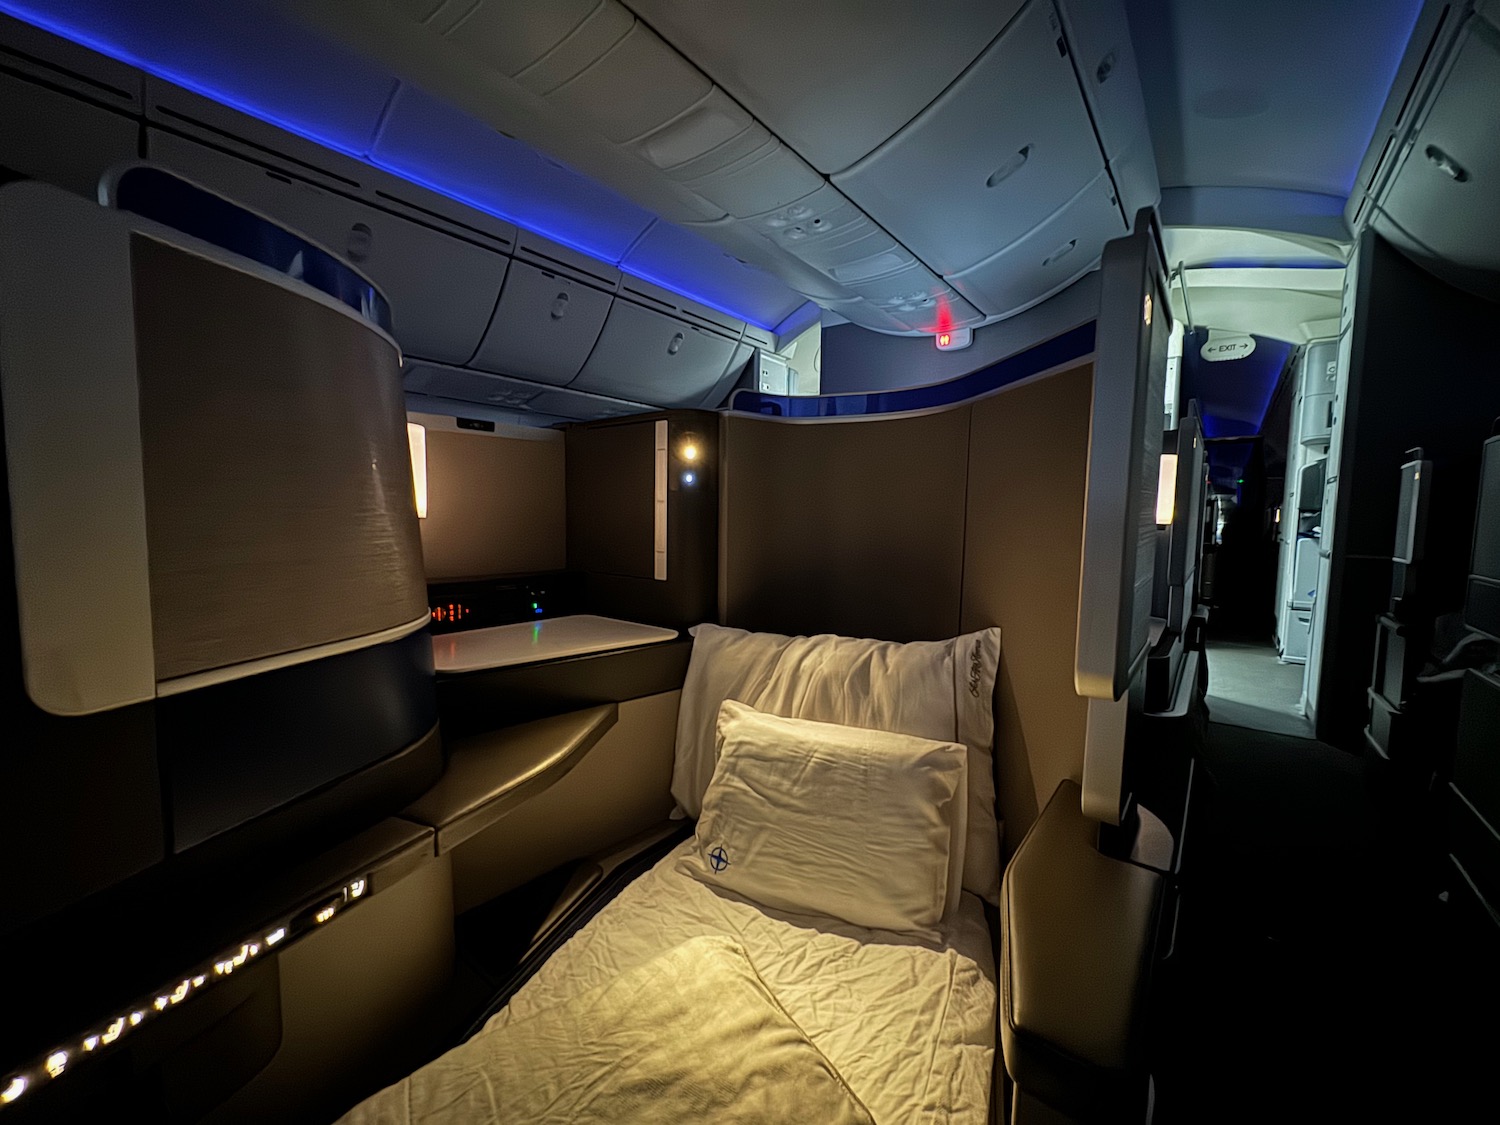 a bed in a cabin of an airplane